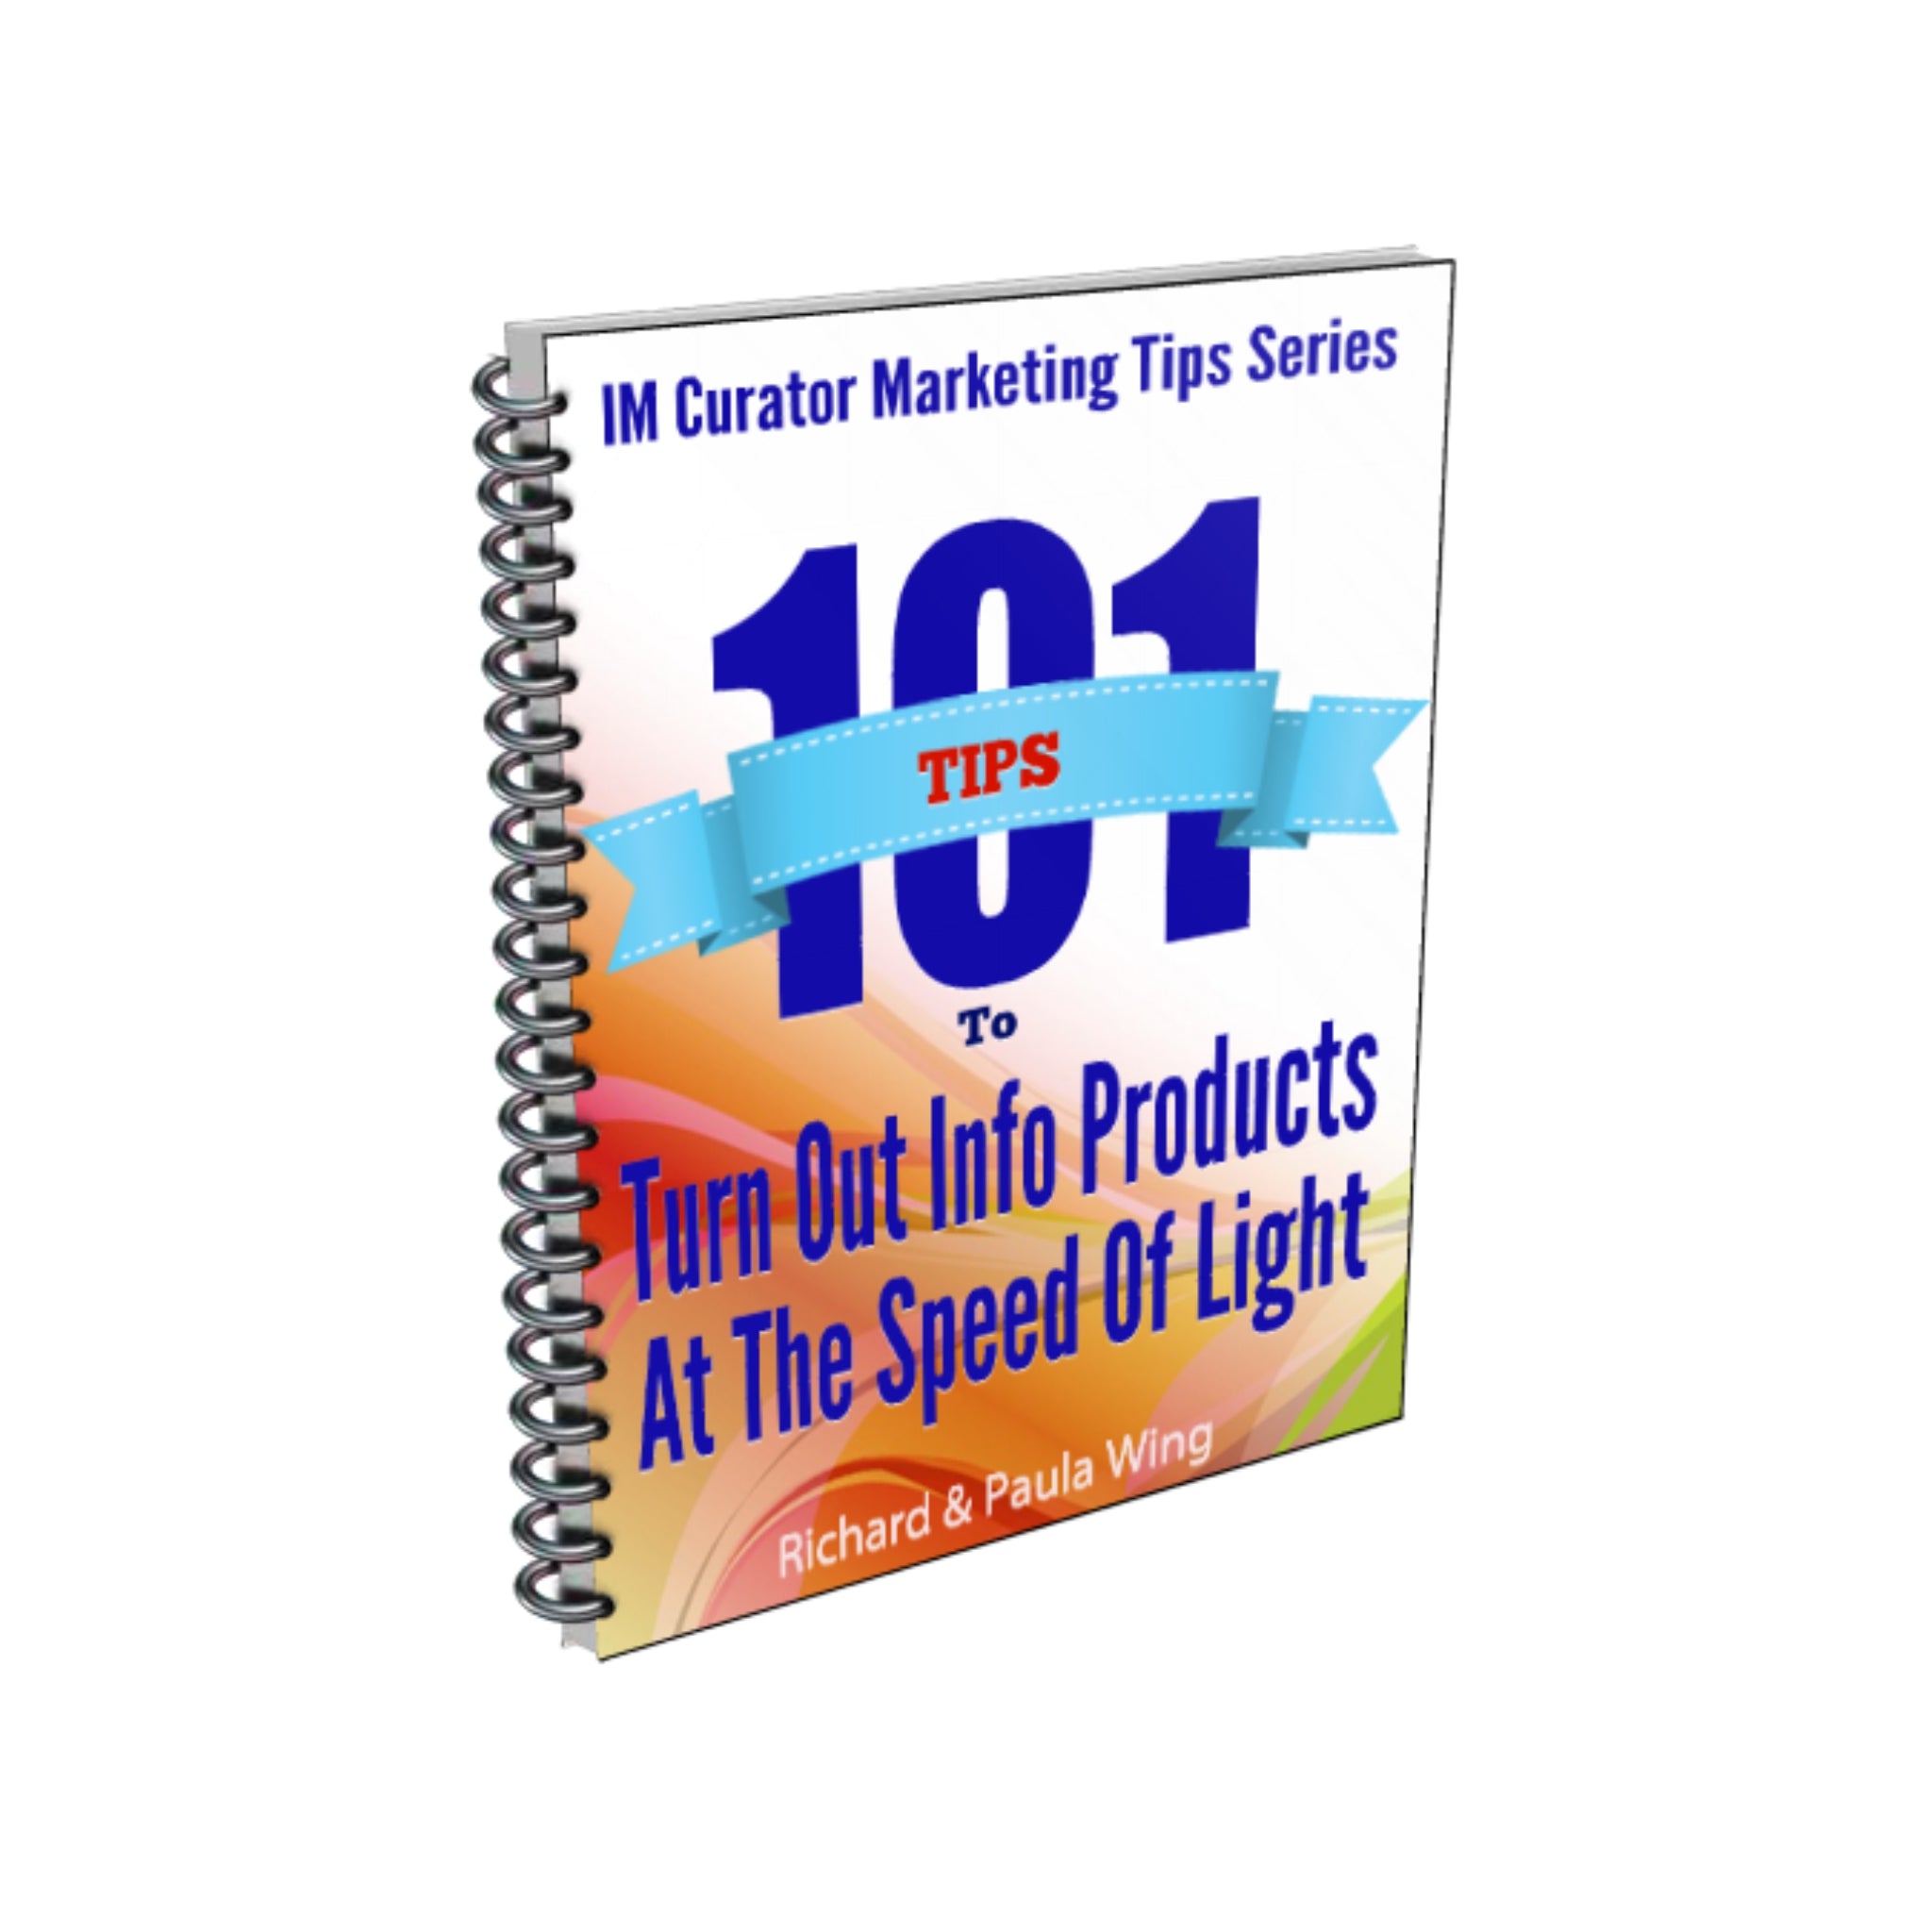 101 Tips To Turn Out Info Products At The Speed Of Light Ebook